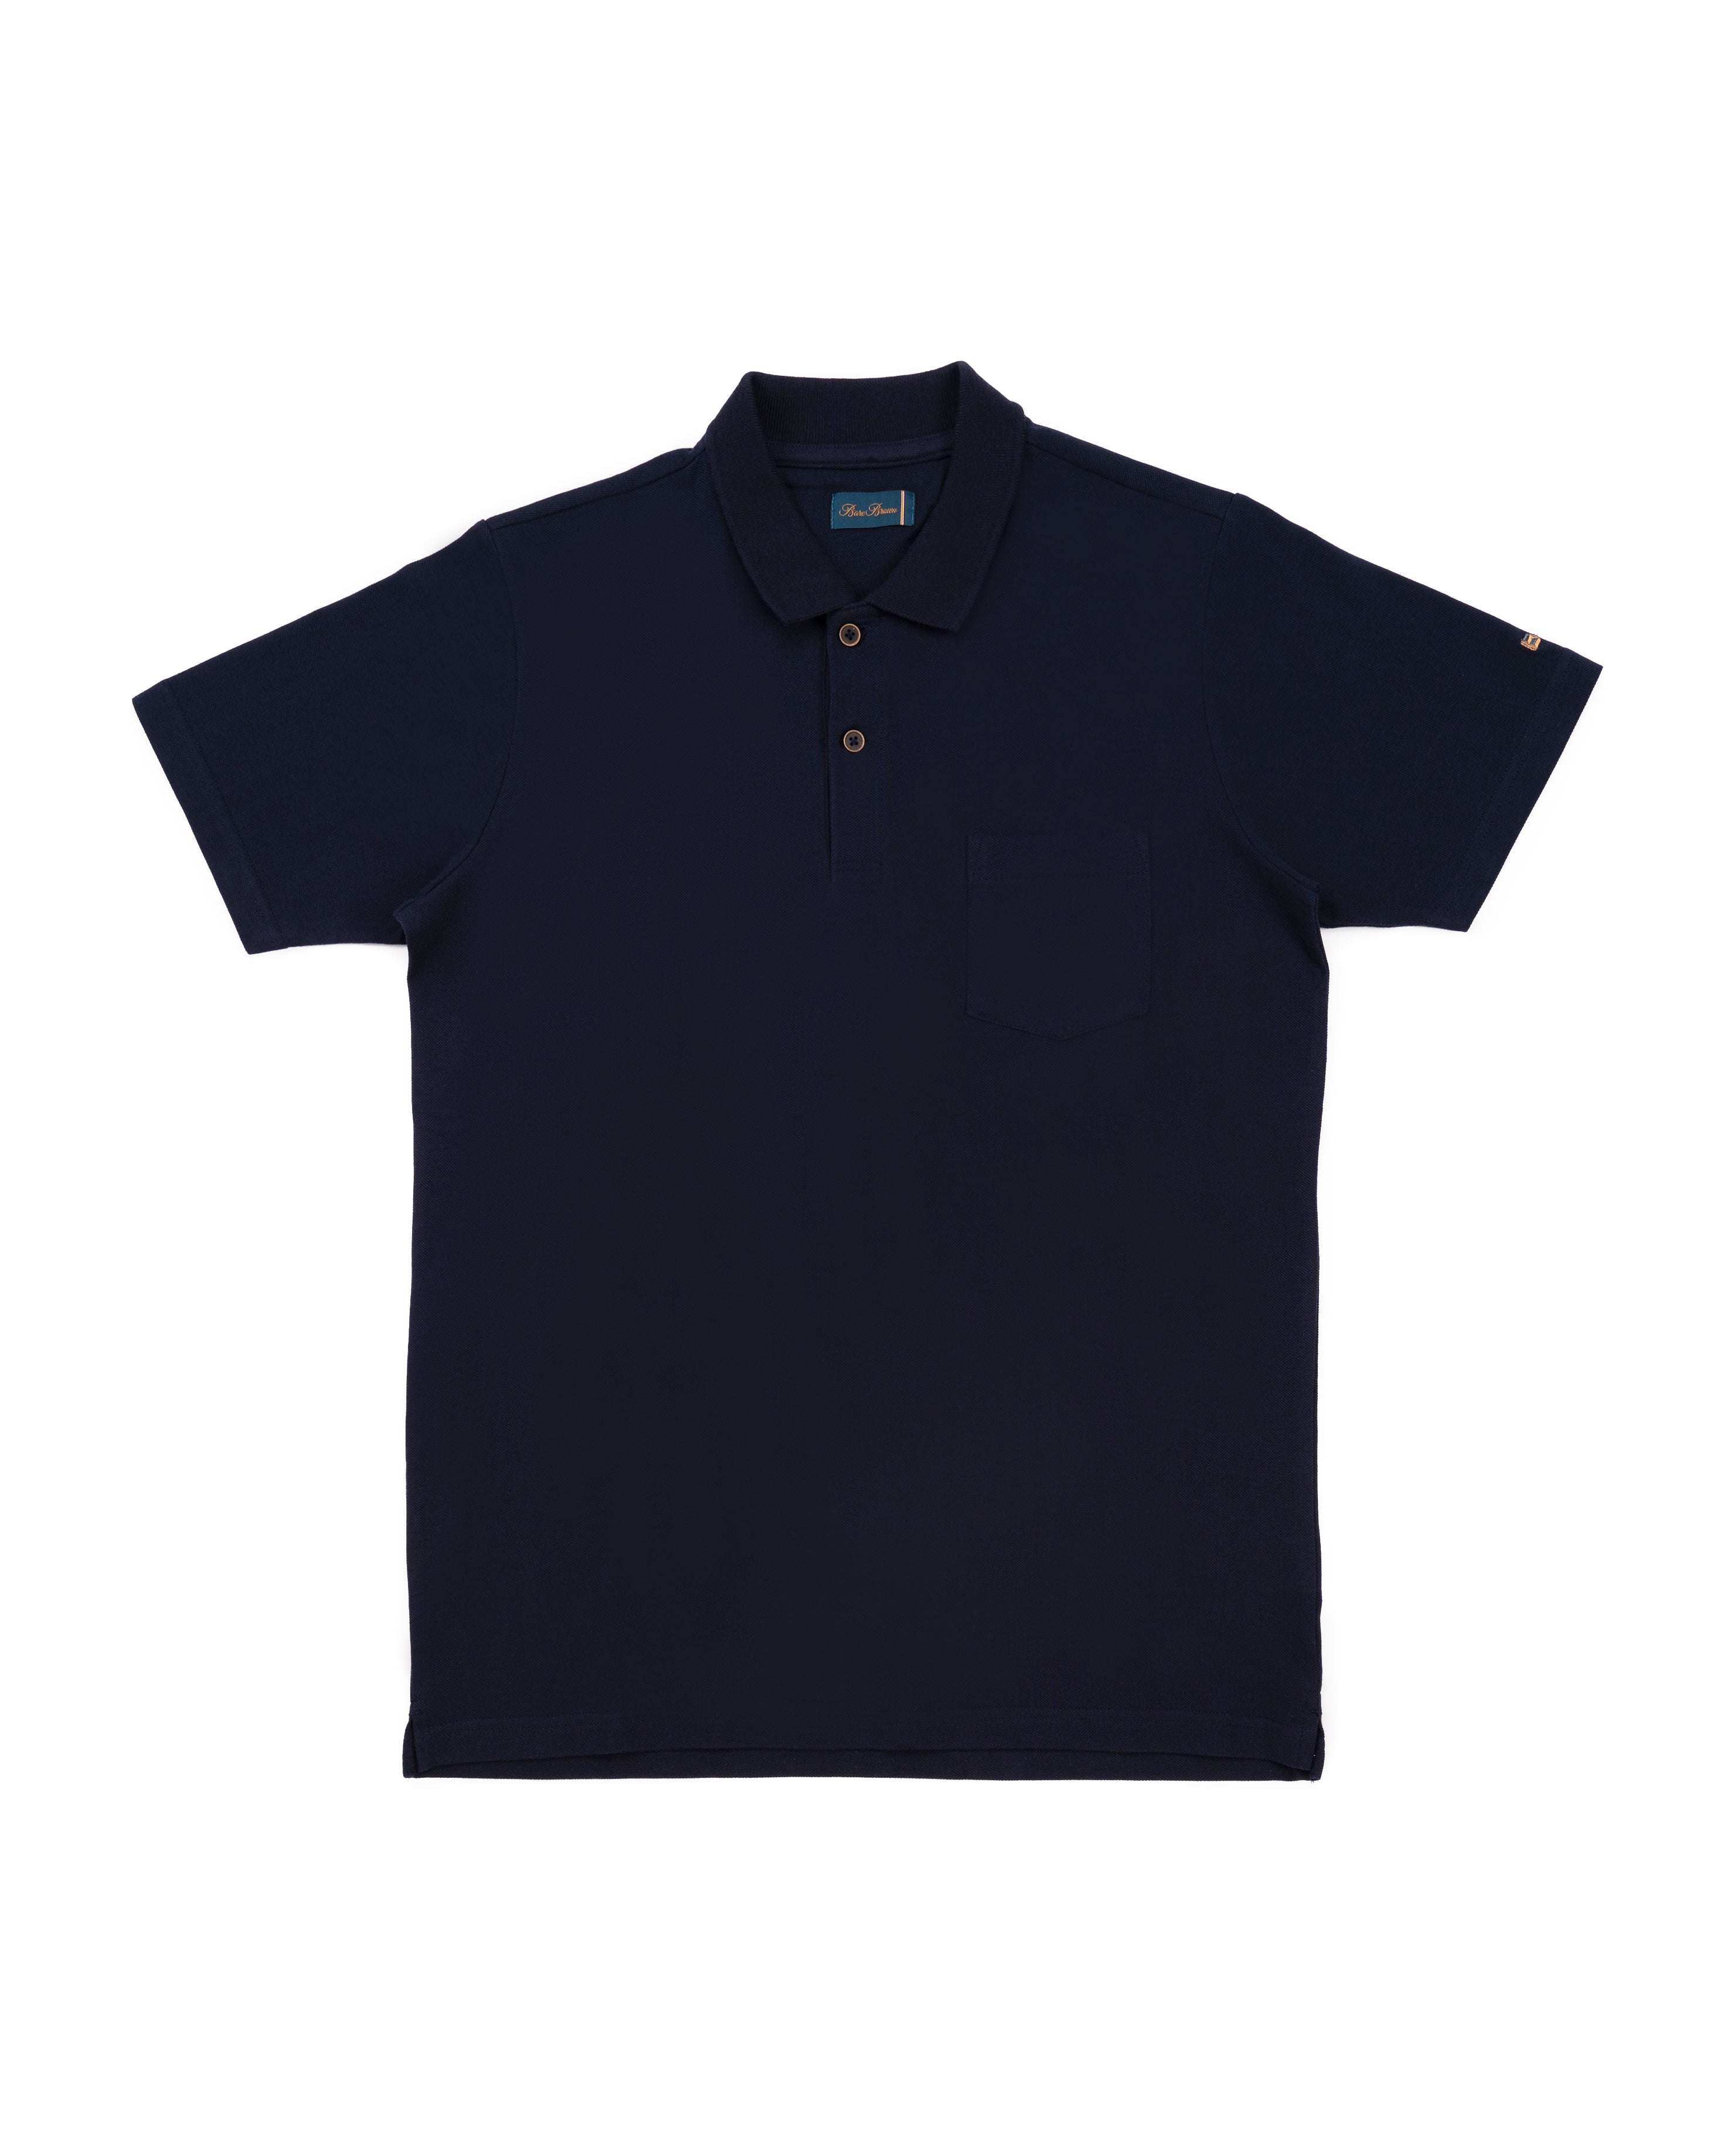 Bare Brown Navy Slim Fit Lightweight Polo T-Shirt with Pocket